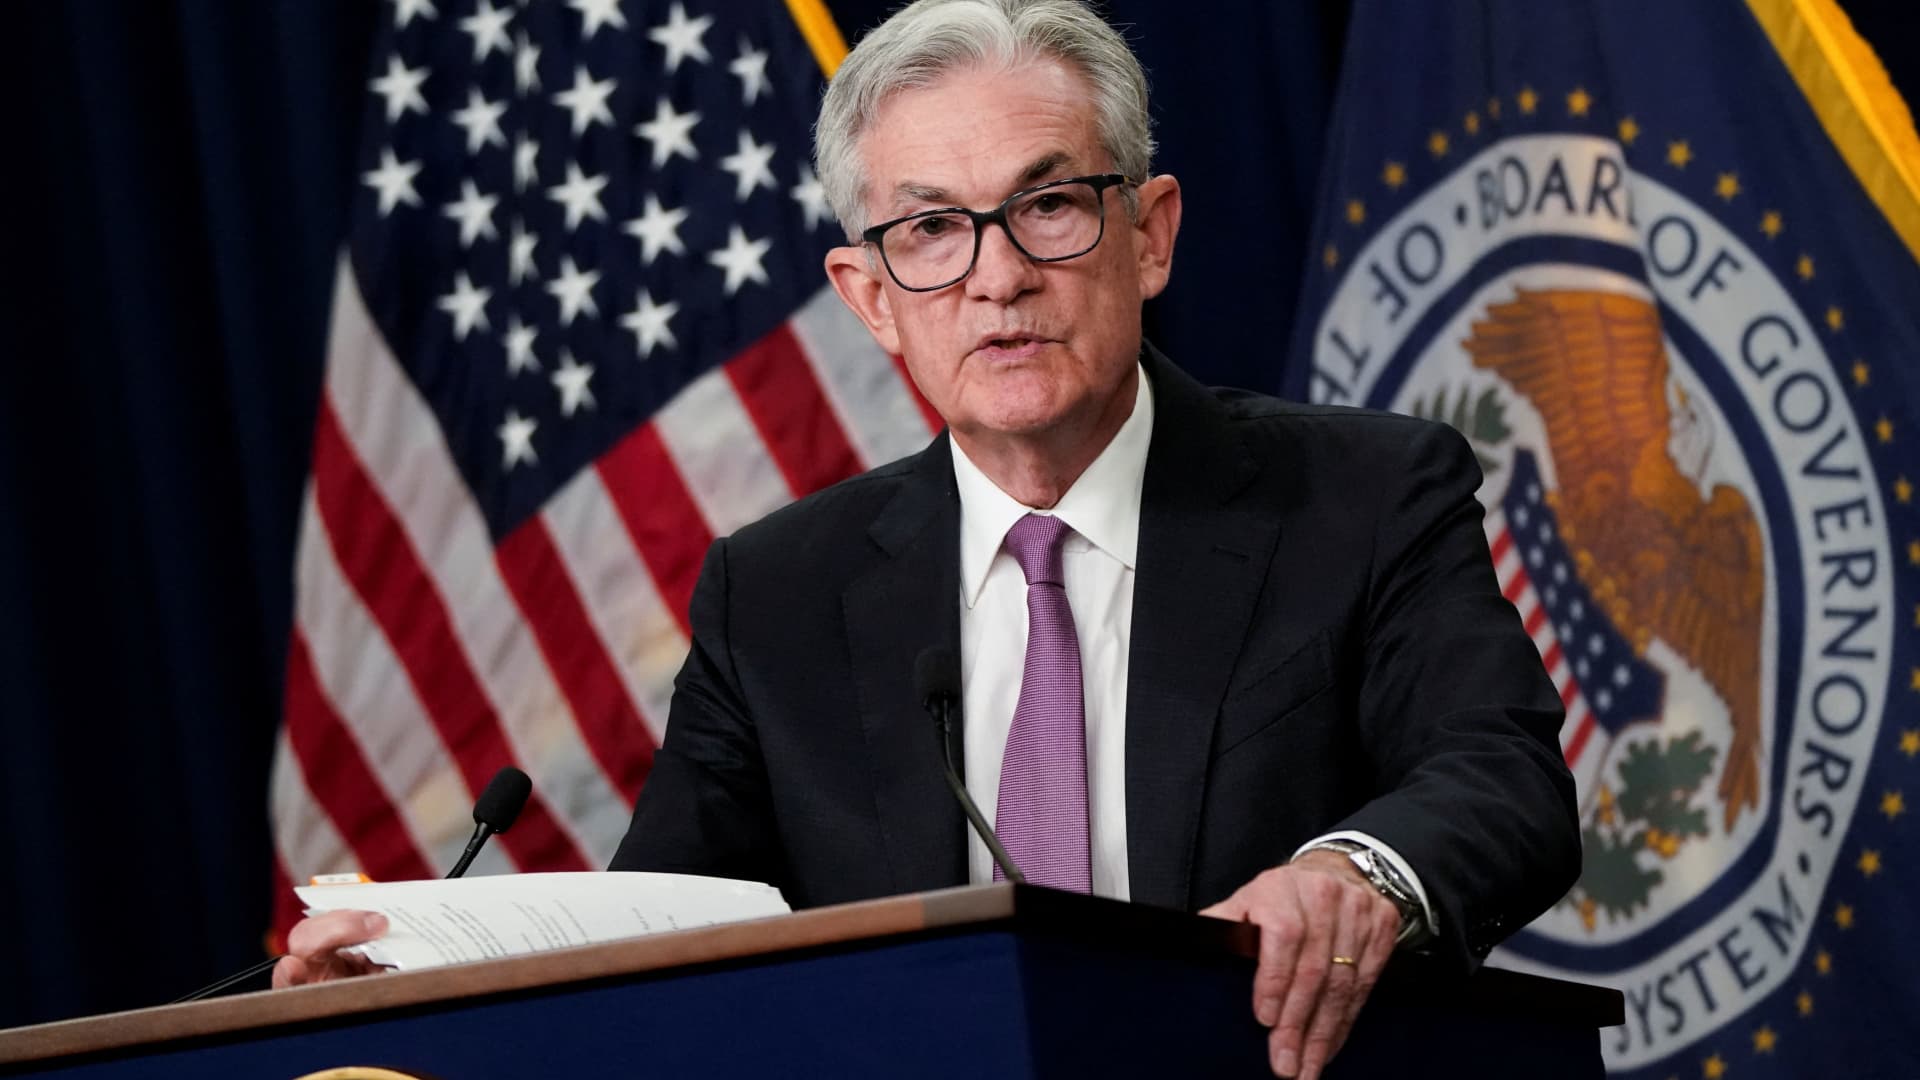 Fed's three-quarters of a point hike due, but forecast is top focus